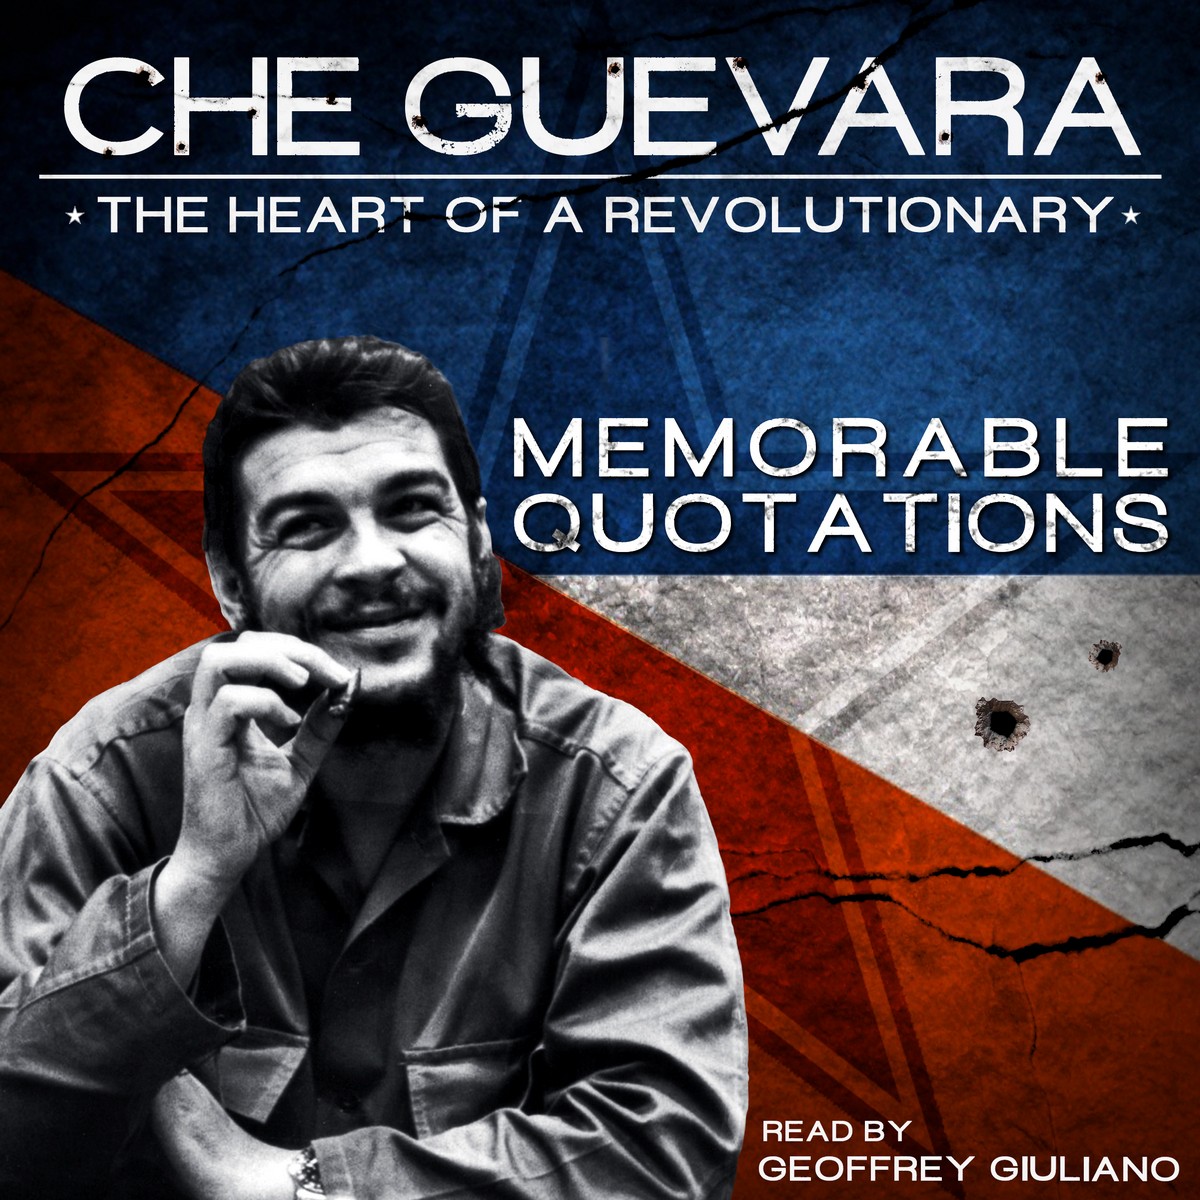 Che Guevara – The Heart of theRevolutionary